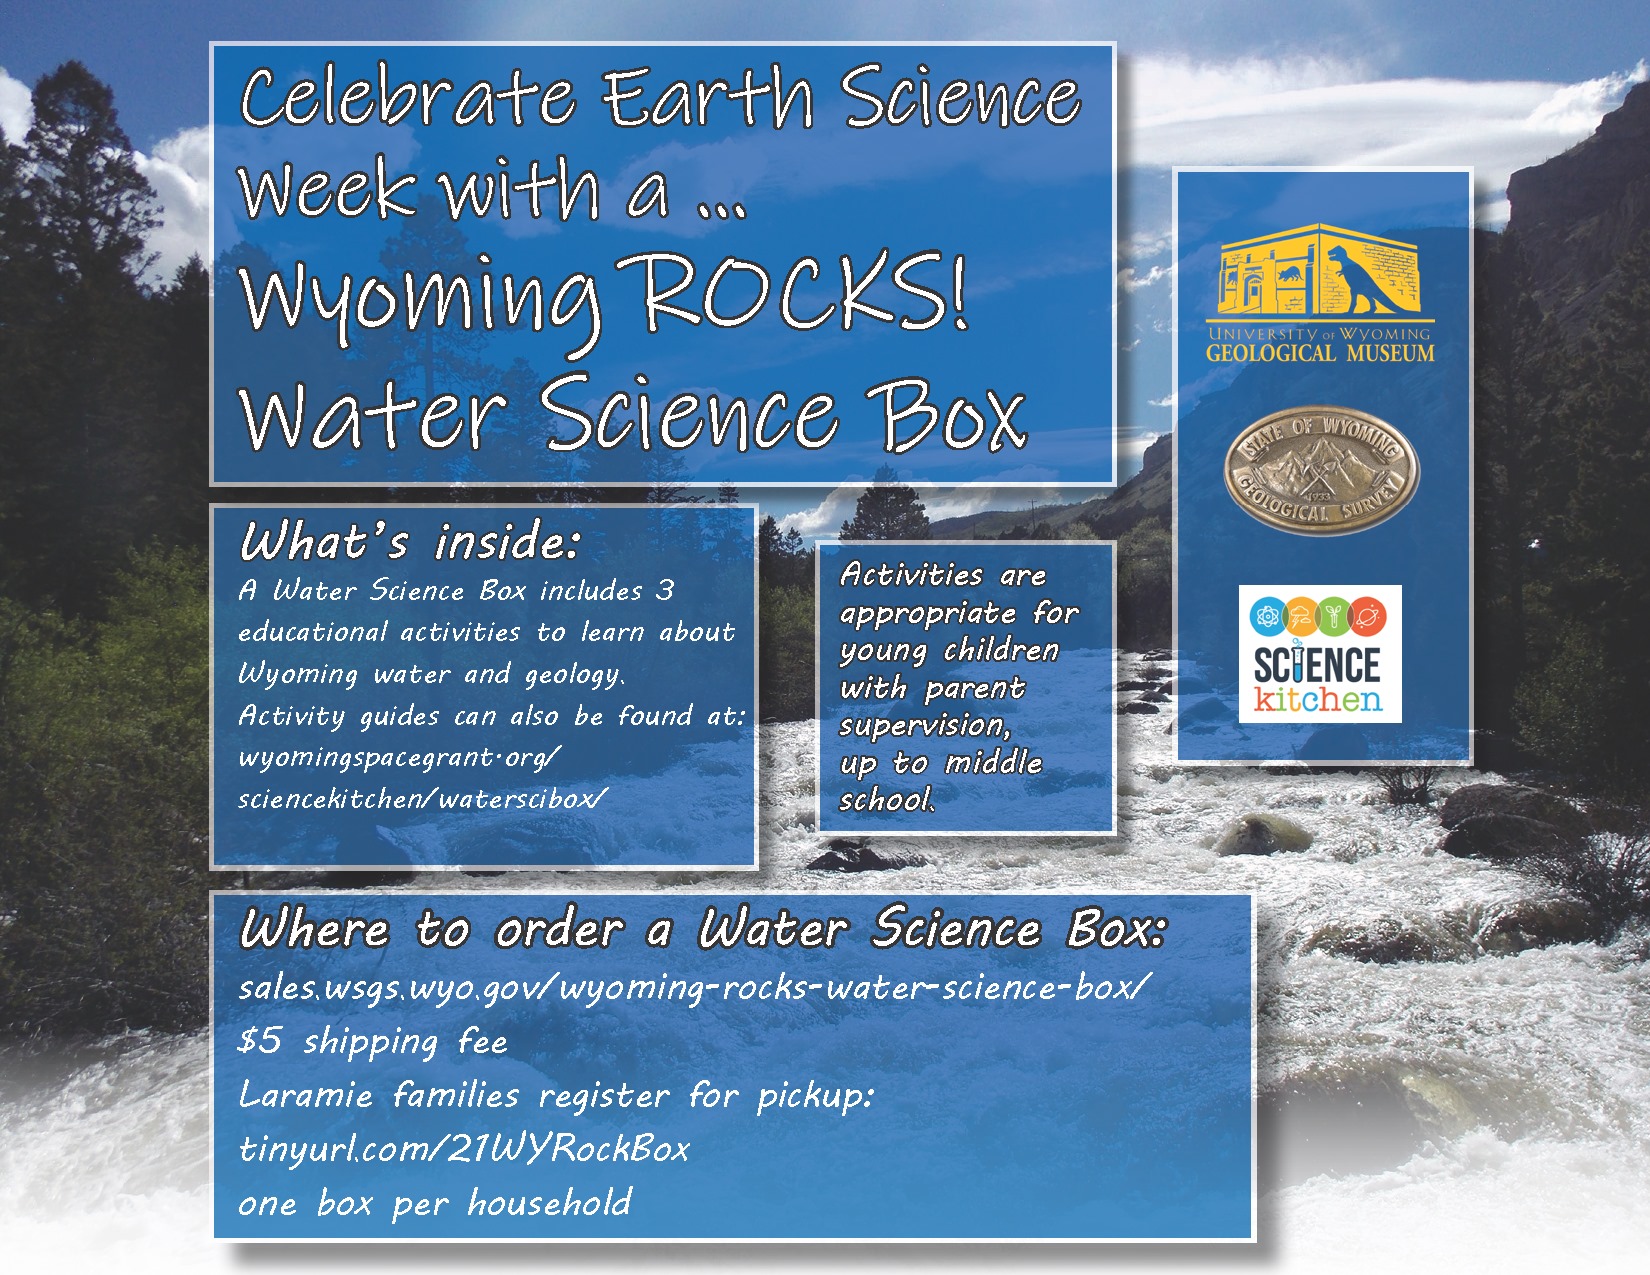 Earth Science Link promo poster